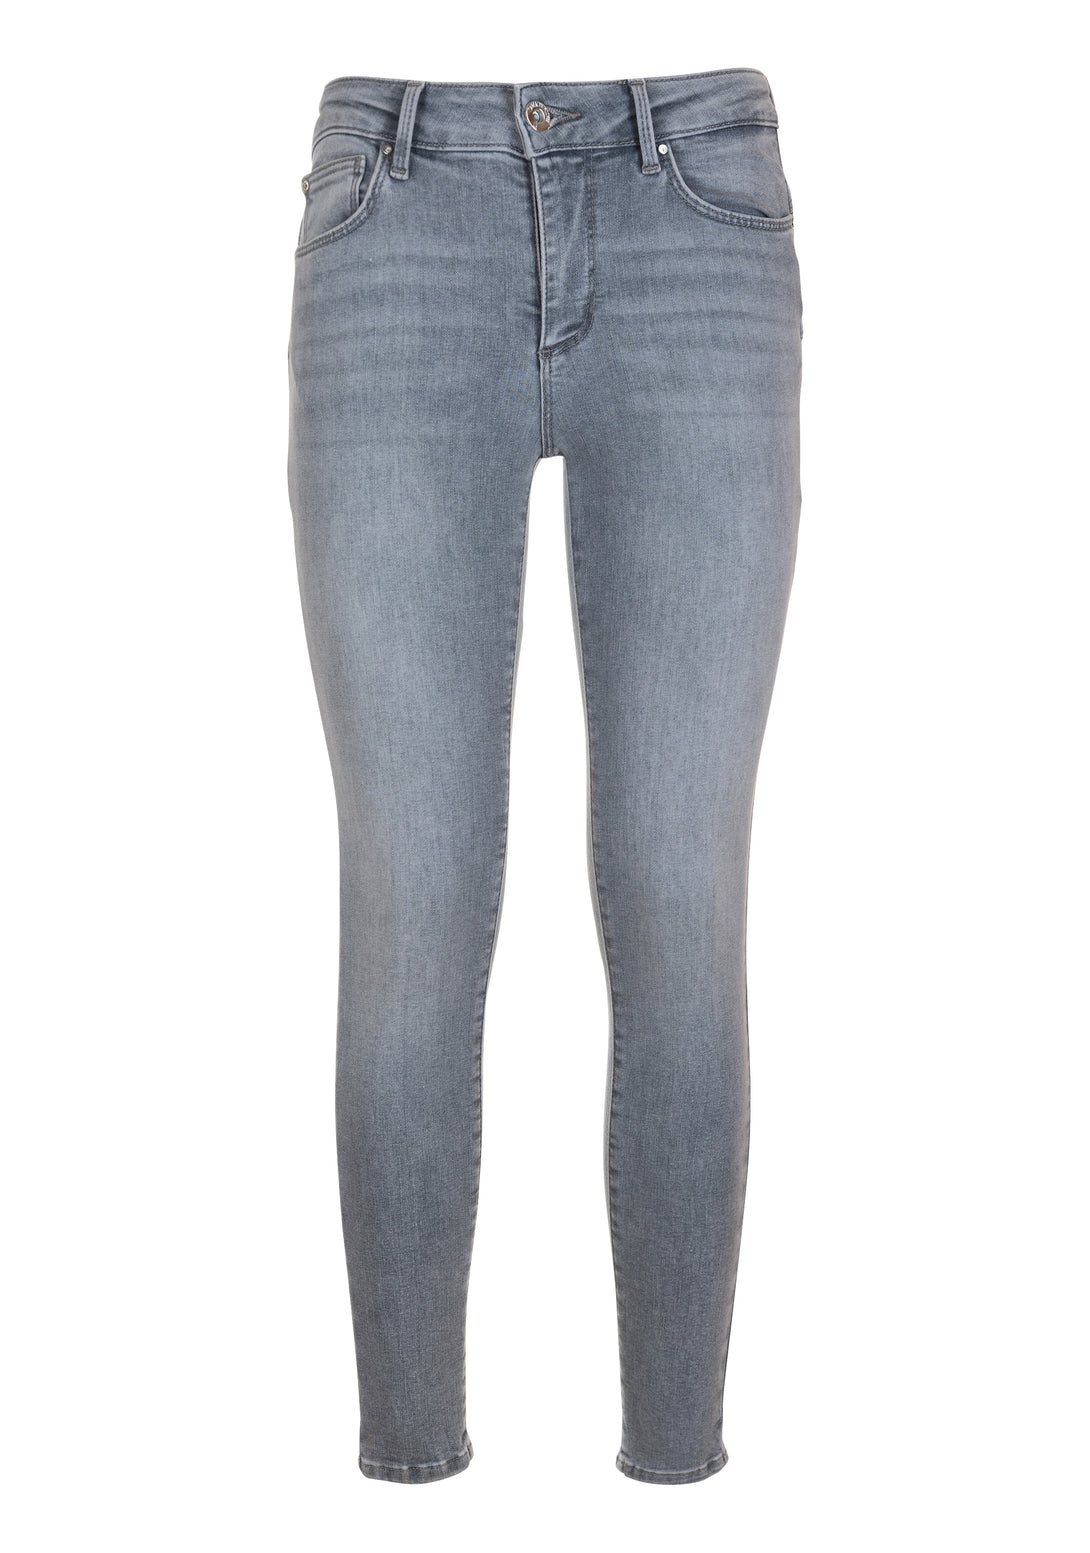 Jeans skinny fit with push-up effect made in grey denim with middle wash Fracomina FP23SV8000D40893-156-1